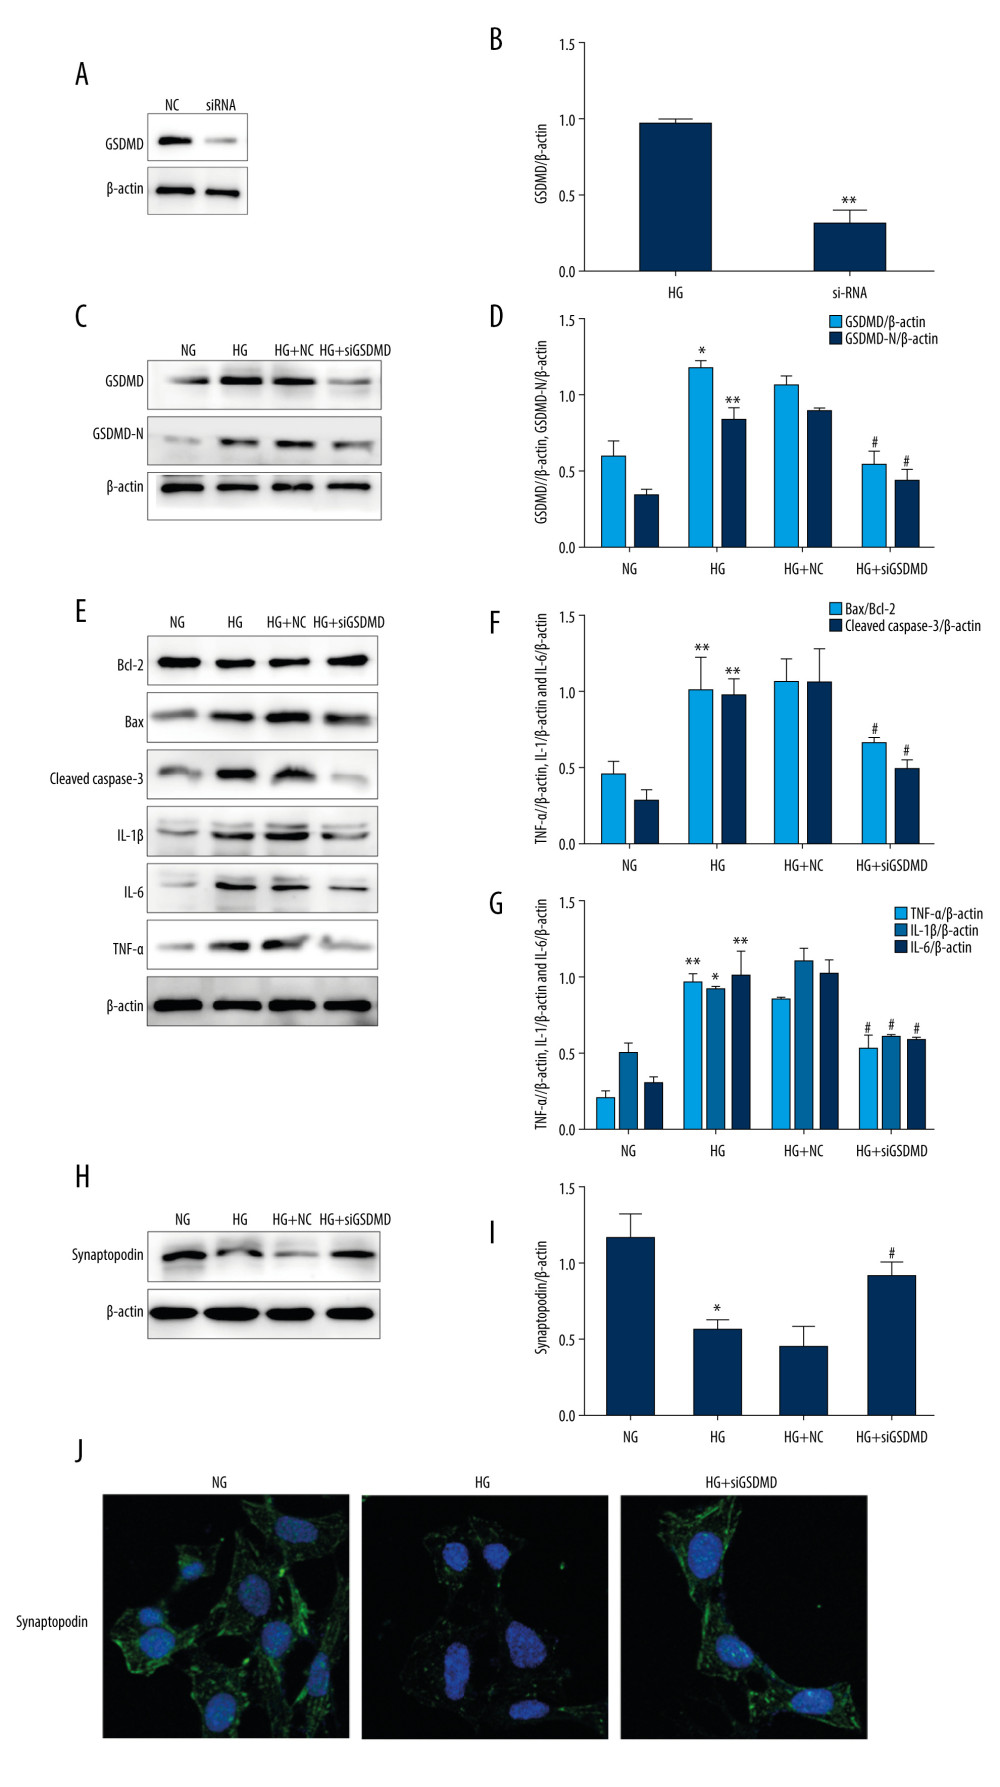 Effects of GSDMD gene knockout on inflammation and apoptosis in mouse podocytes induced by HG. (A–D) The expression of siGSDMD protein was detected by western blot. (E–G) The activity of Bax, Bcl-2, cleaved caspase-3, IL-1β, IL-6, and TNF-α was evaluated by western blotting. (H–J) The activities of synaptopodin in mouse podocytes was evaluated by western blotting and immunofluorescence. NC – siRNA negative control; siRNA – GSDMD siRNA (20 μM); NG – normal-glucose; HG – high-glucose; HG+NC – high-glucose+siRNA negative control; HG+siGSDMD – high-glucose (30mM)+GSDMD siRNA (20 μM). Date represent the average of 3 measurements. Mean±SD of 3 experiments is shown. * P<0.05, ** P<0.01 vs NG, # P<0.05 vs HG.